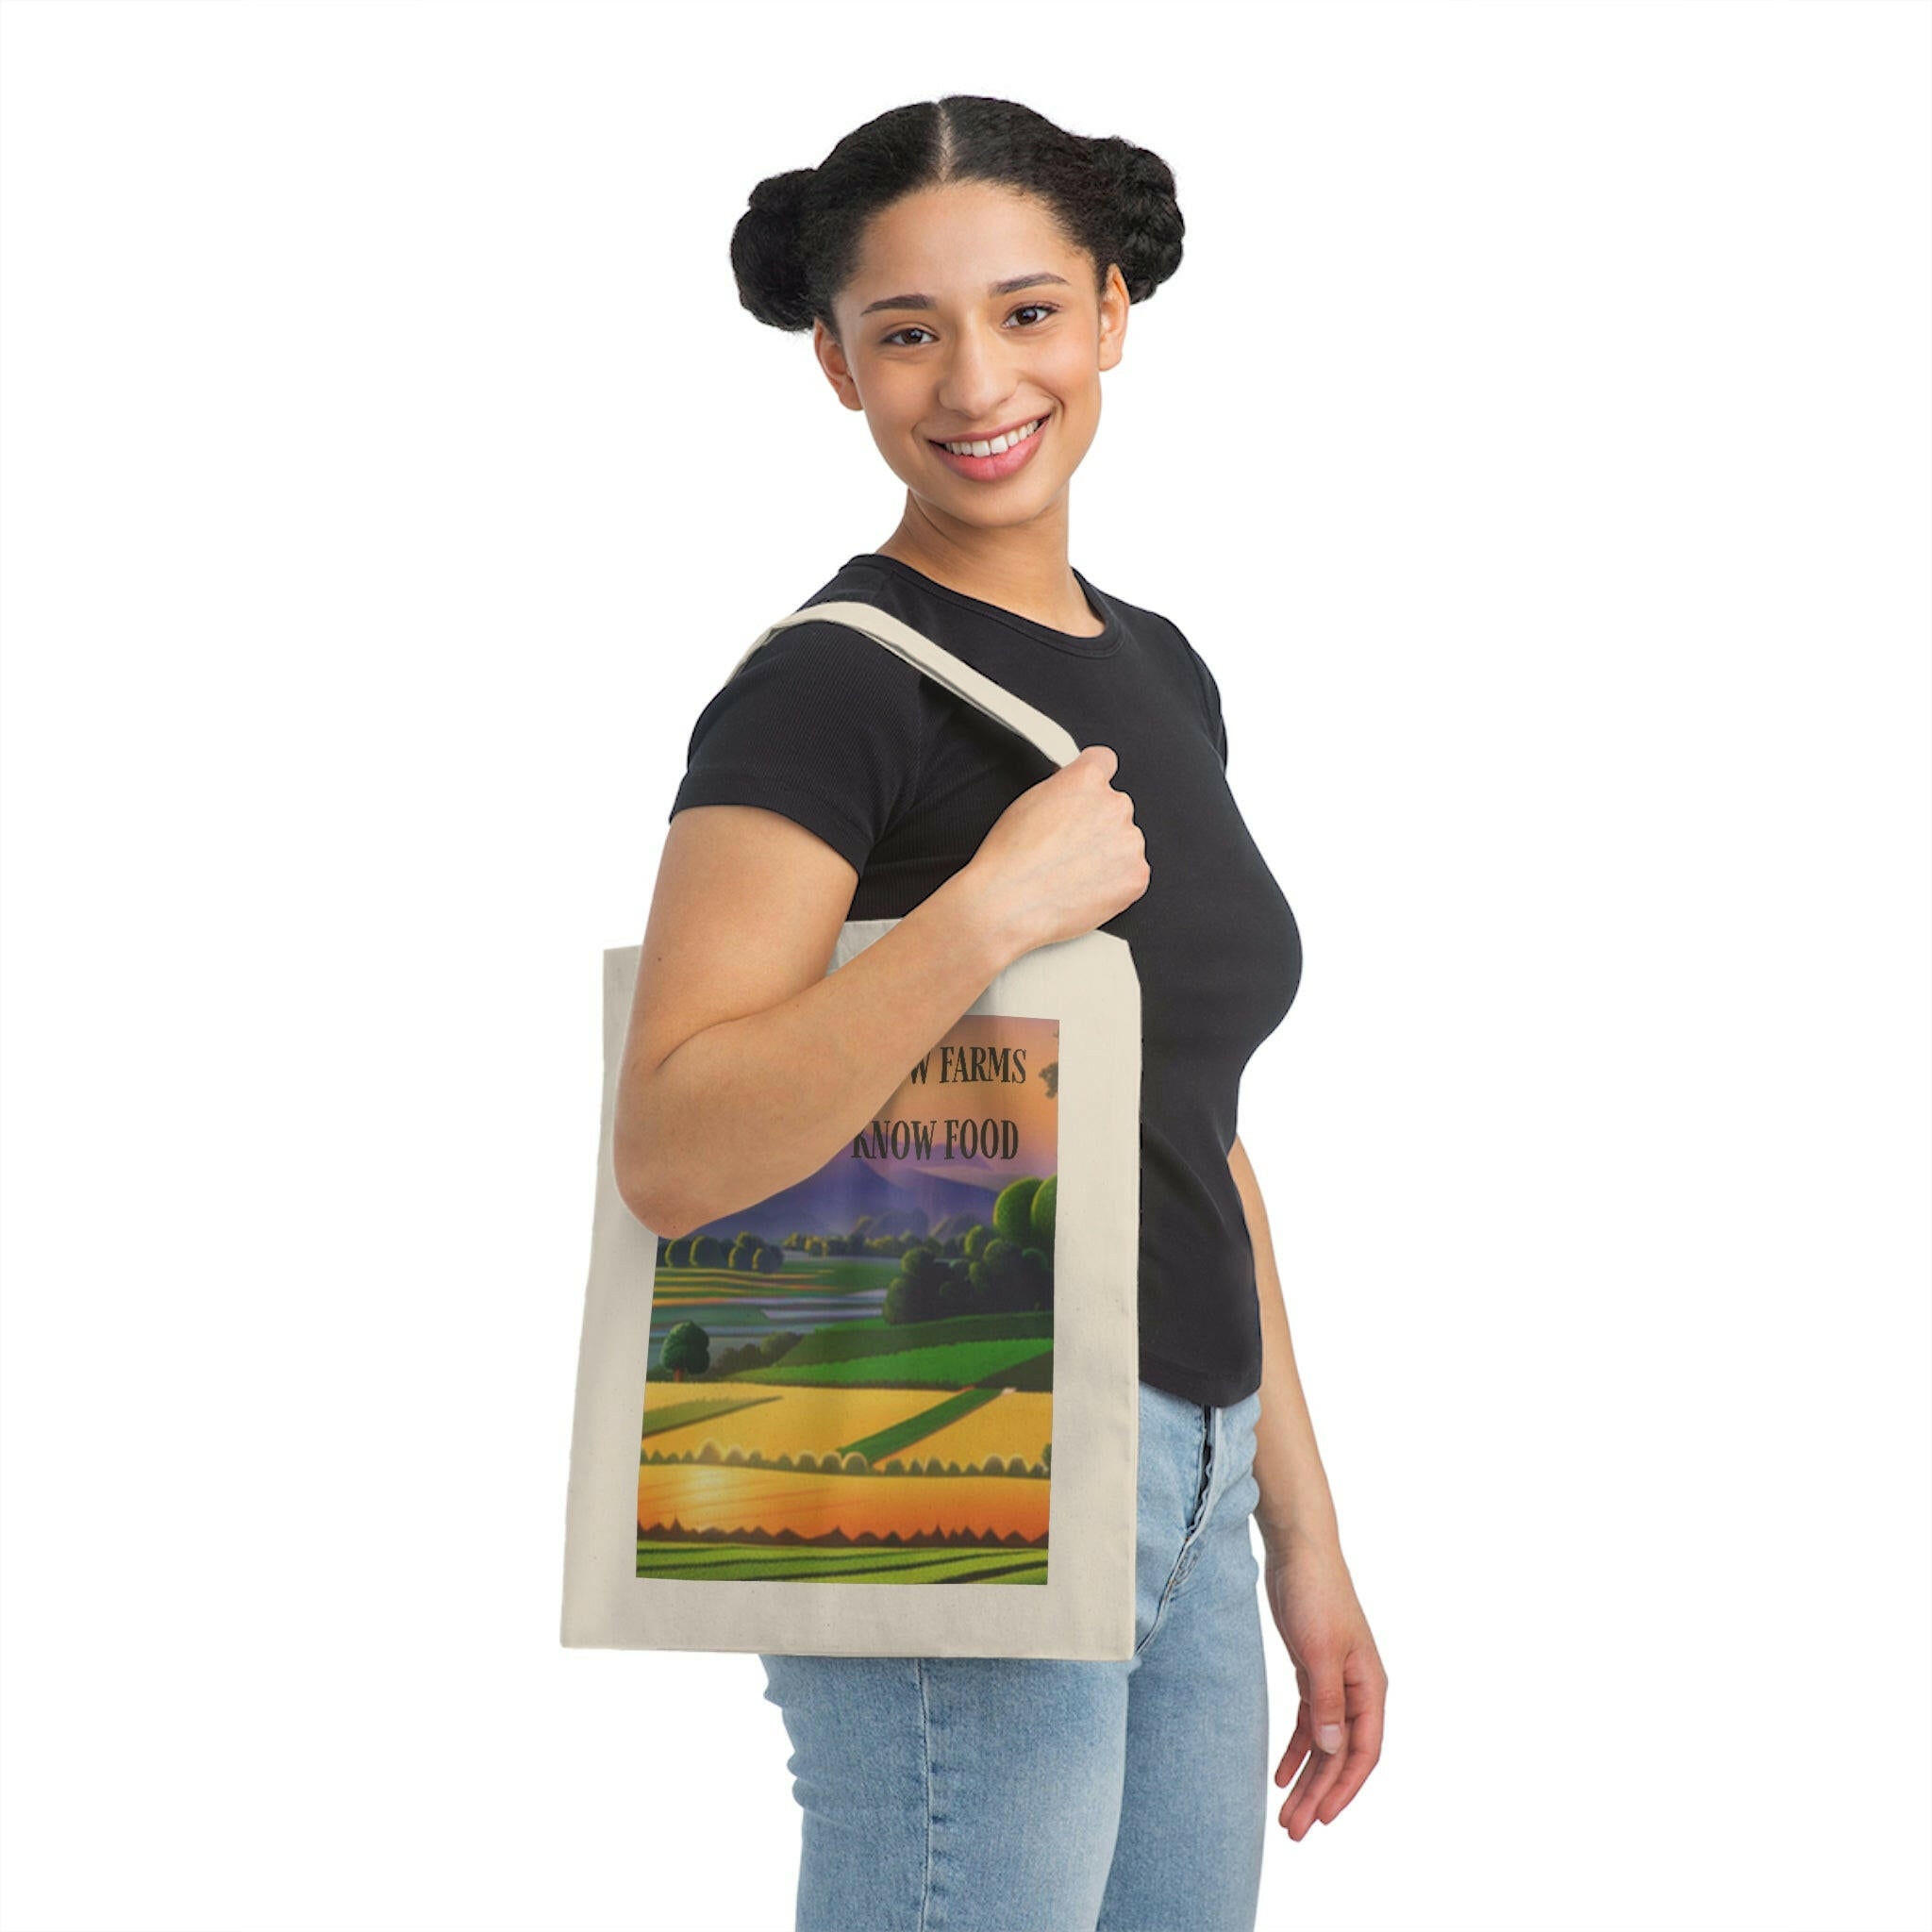 Know Farms Know Food - Purple Mountains Majesty Canvas Tote Bag.